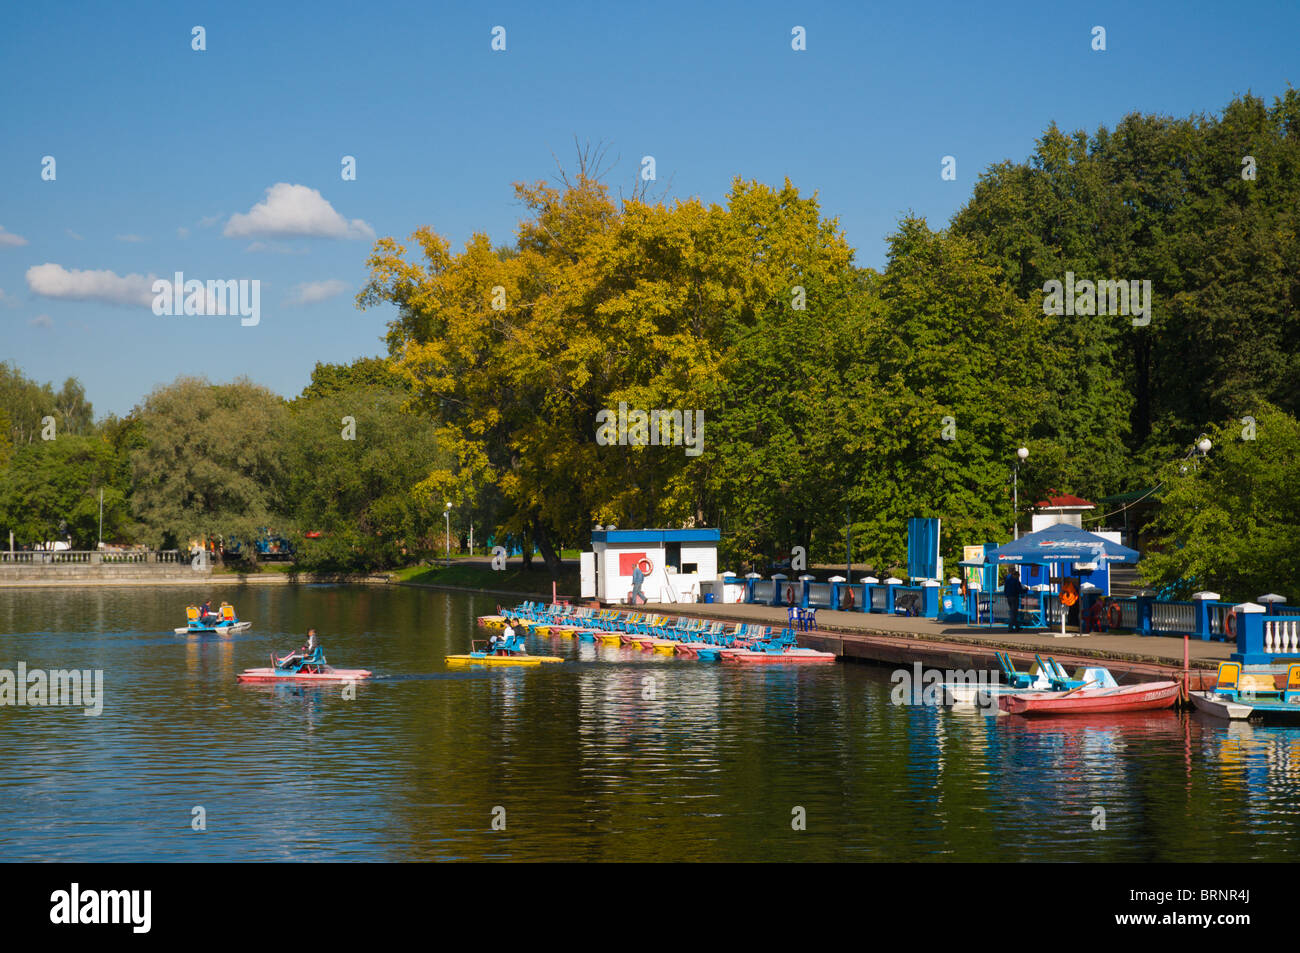 Pedalo rental centre by the lake in Gorky Park central Moscow Russia Europe Stock Photo